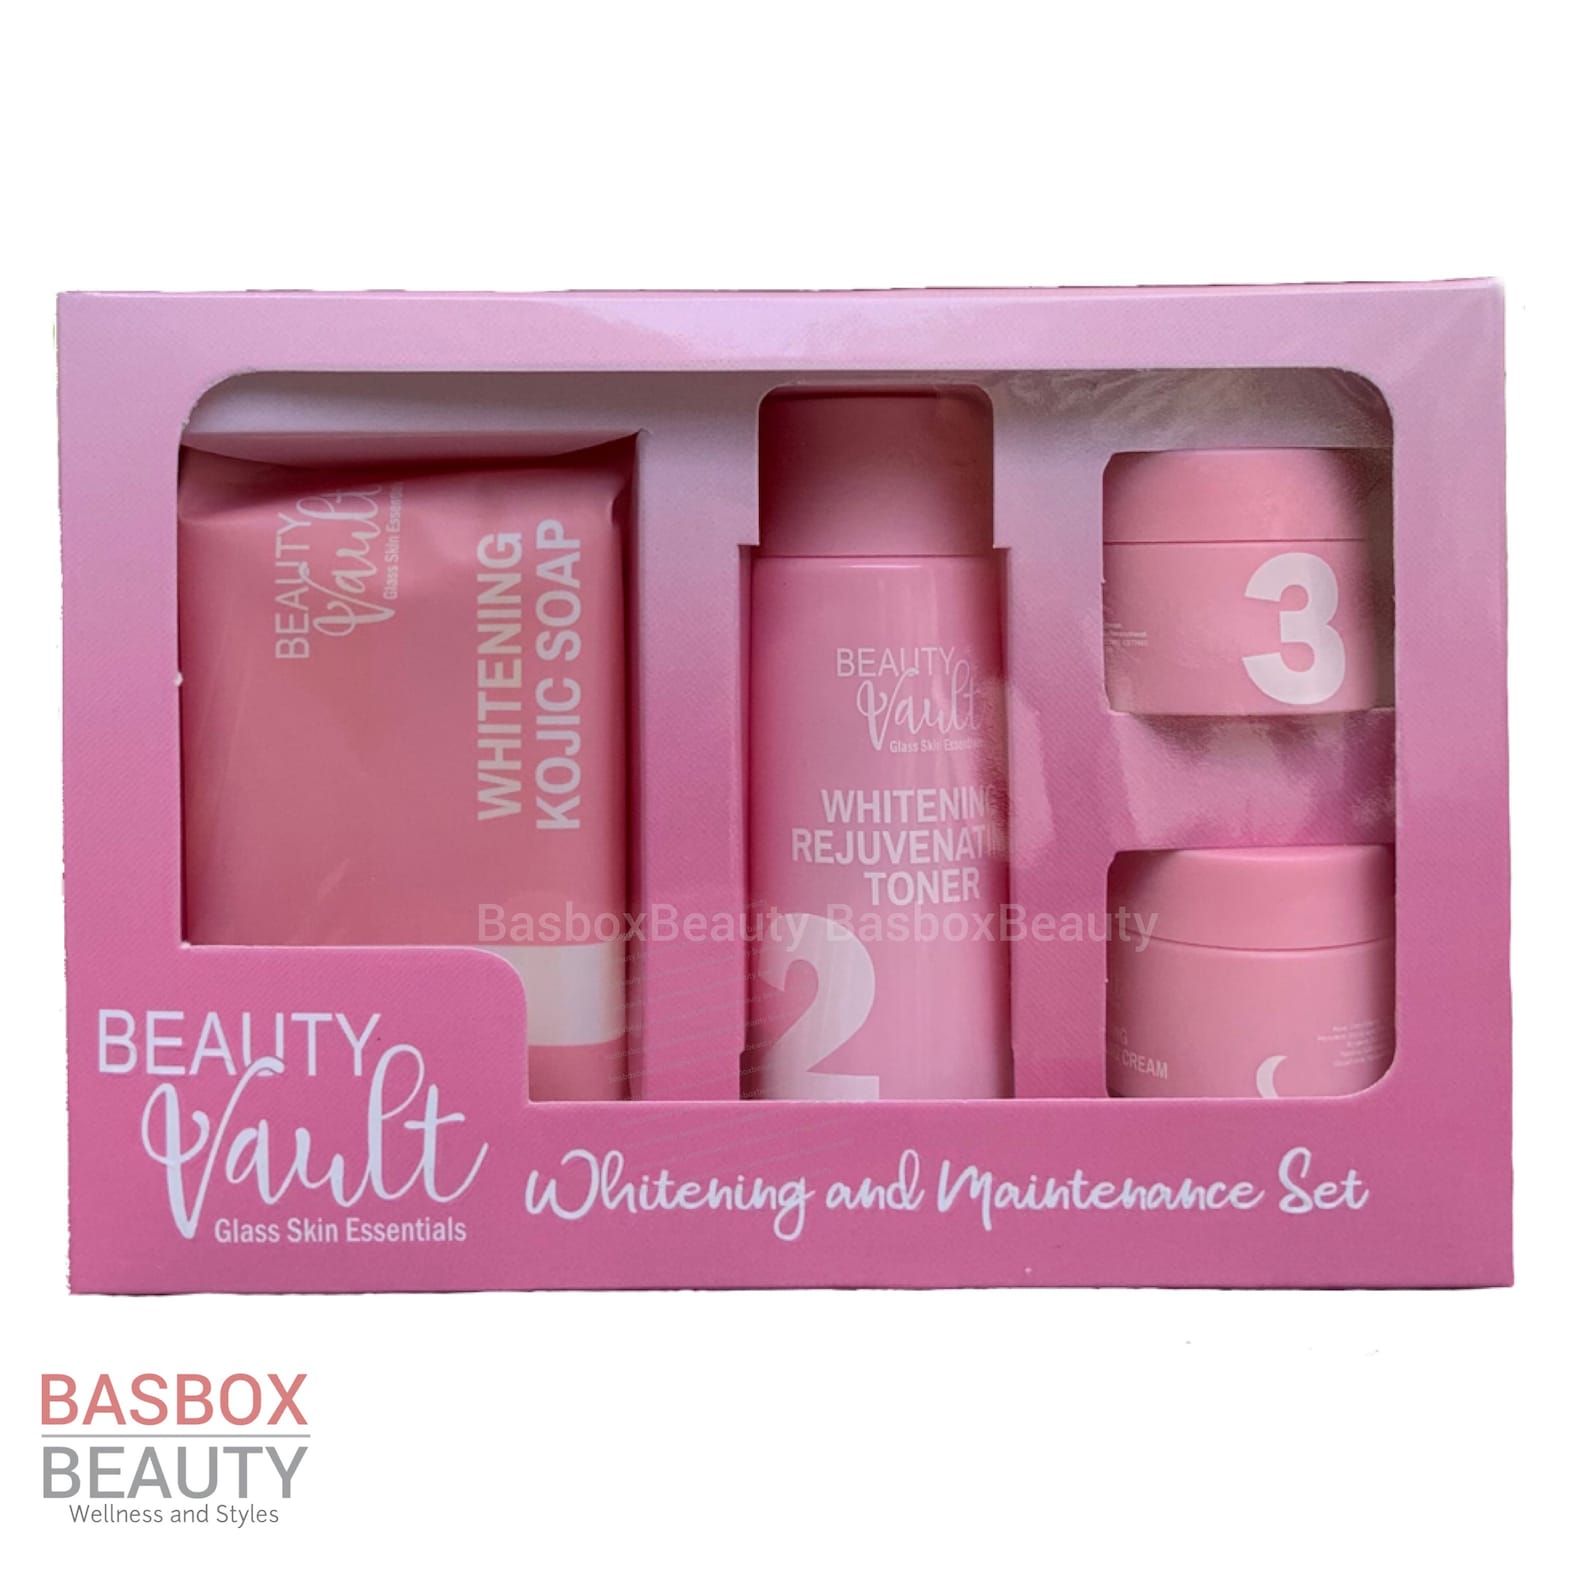 beauty-vault-whitening-and-maintenance-set-new-packaging-etsy